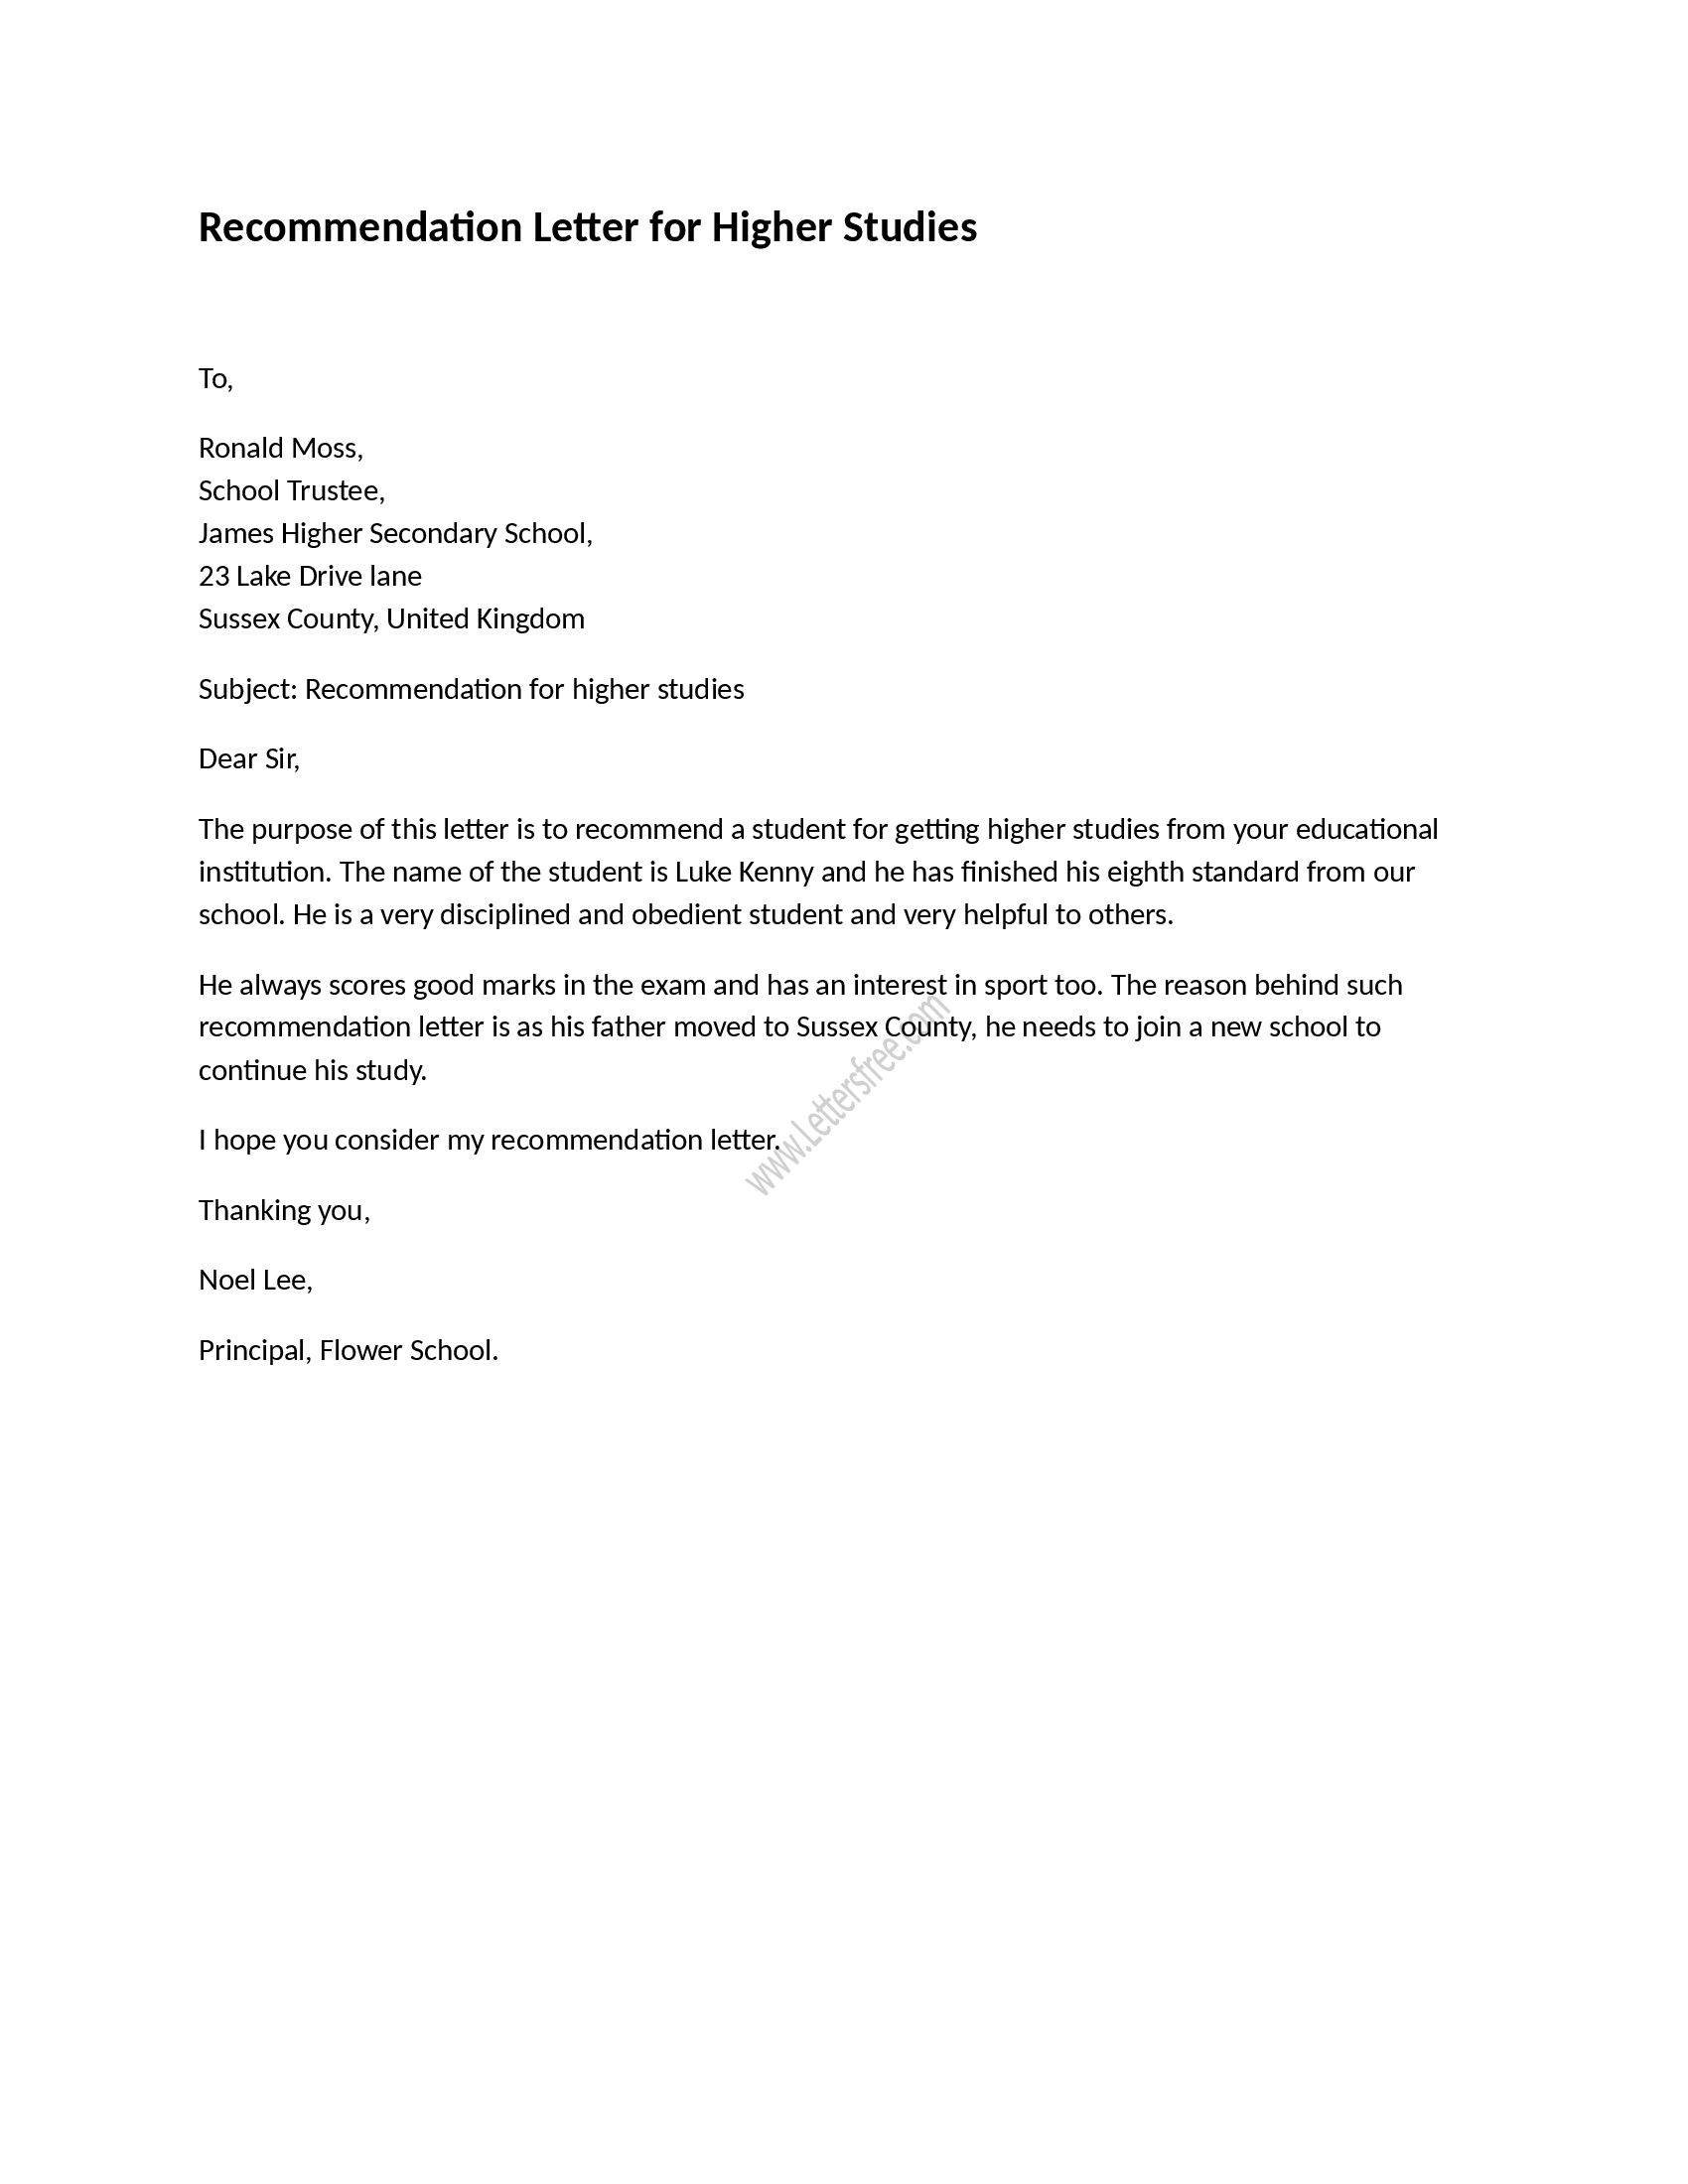 Recommendation Letter For Higher Studies Reference Letter within dimensions 1700 X 2200